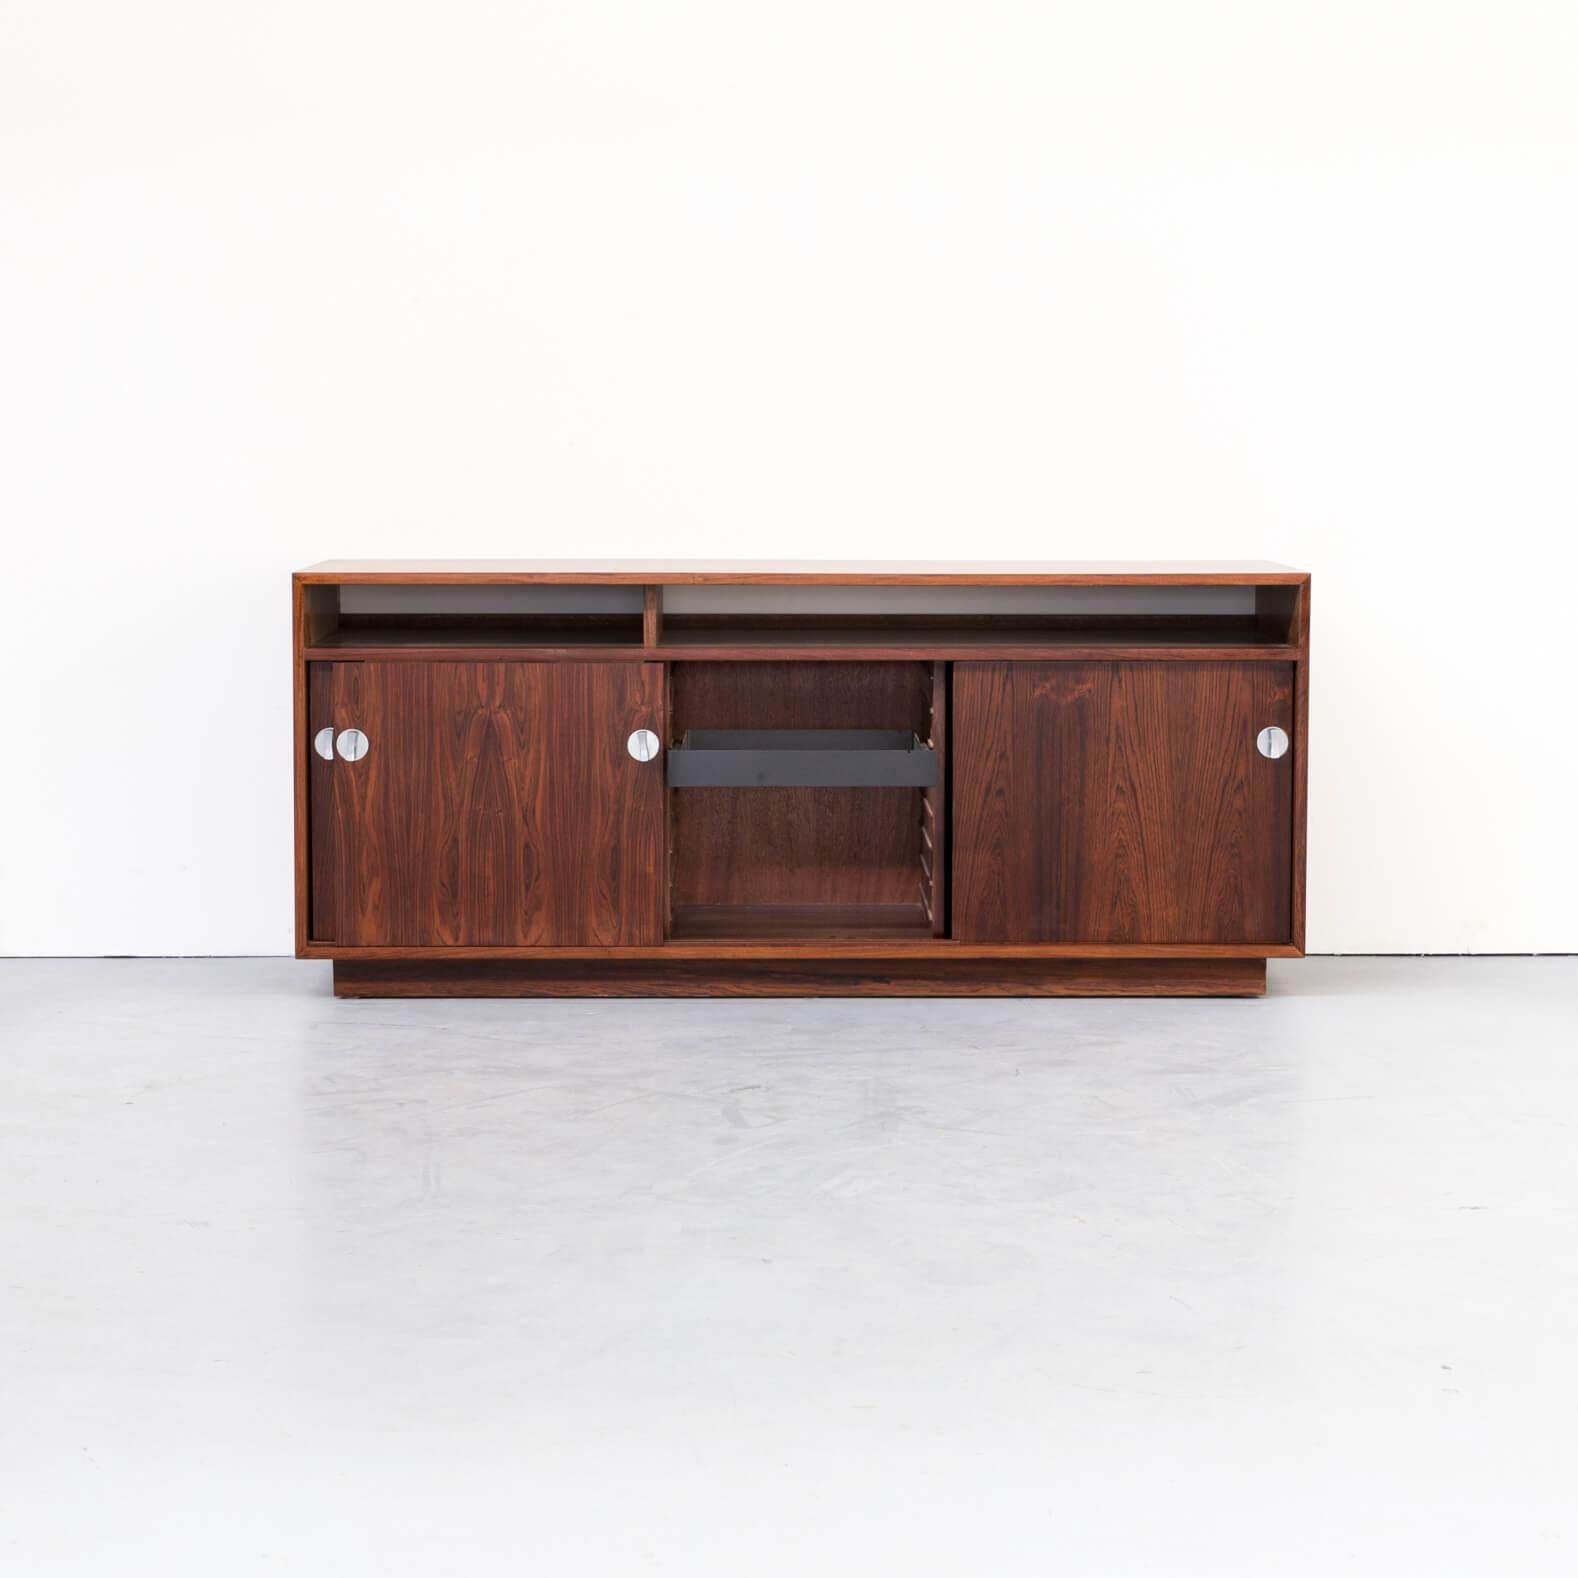 One beautiful rosewood lowboard matching in the diplomat office series of Cado designed by Finn Juhl.